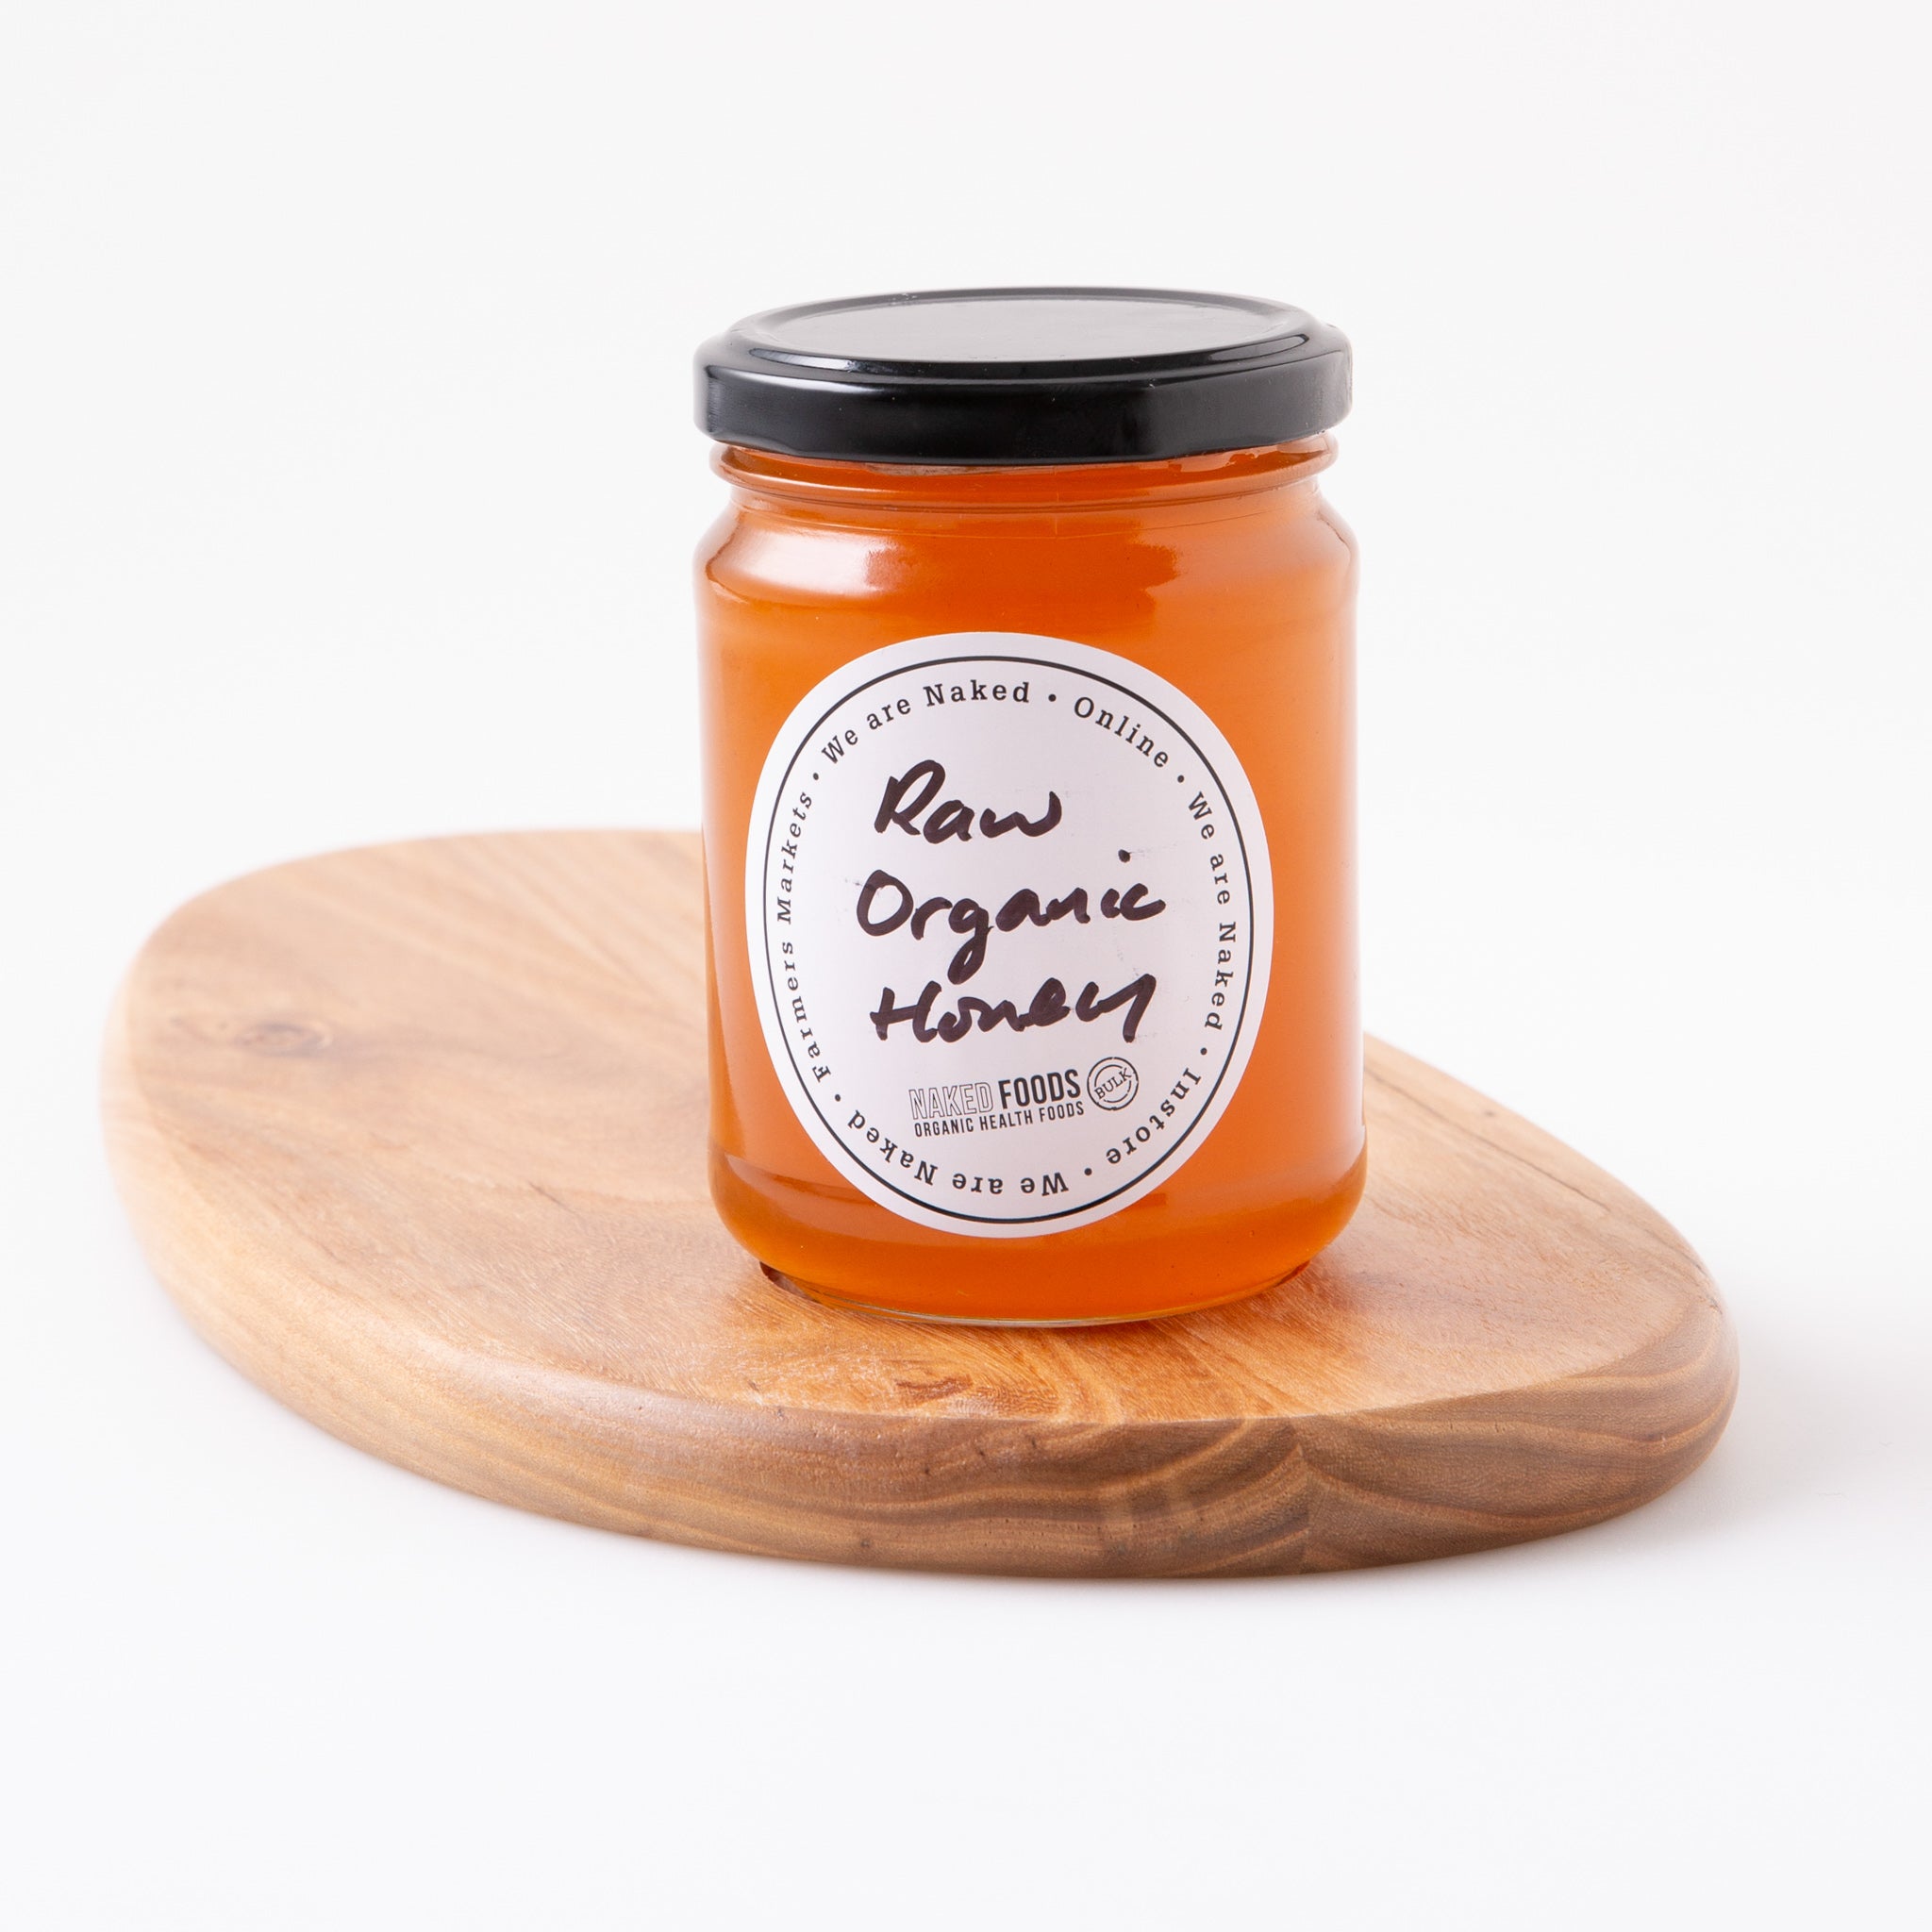 A jar of raw organic honey made in Australia by Naked Foods